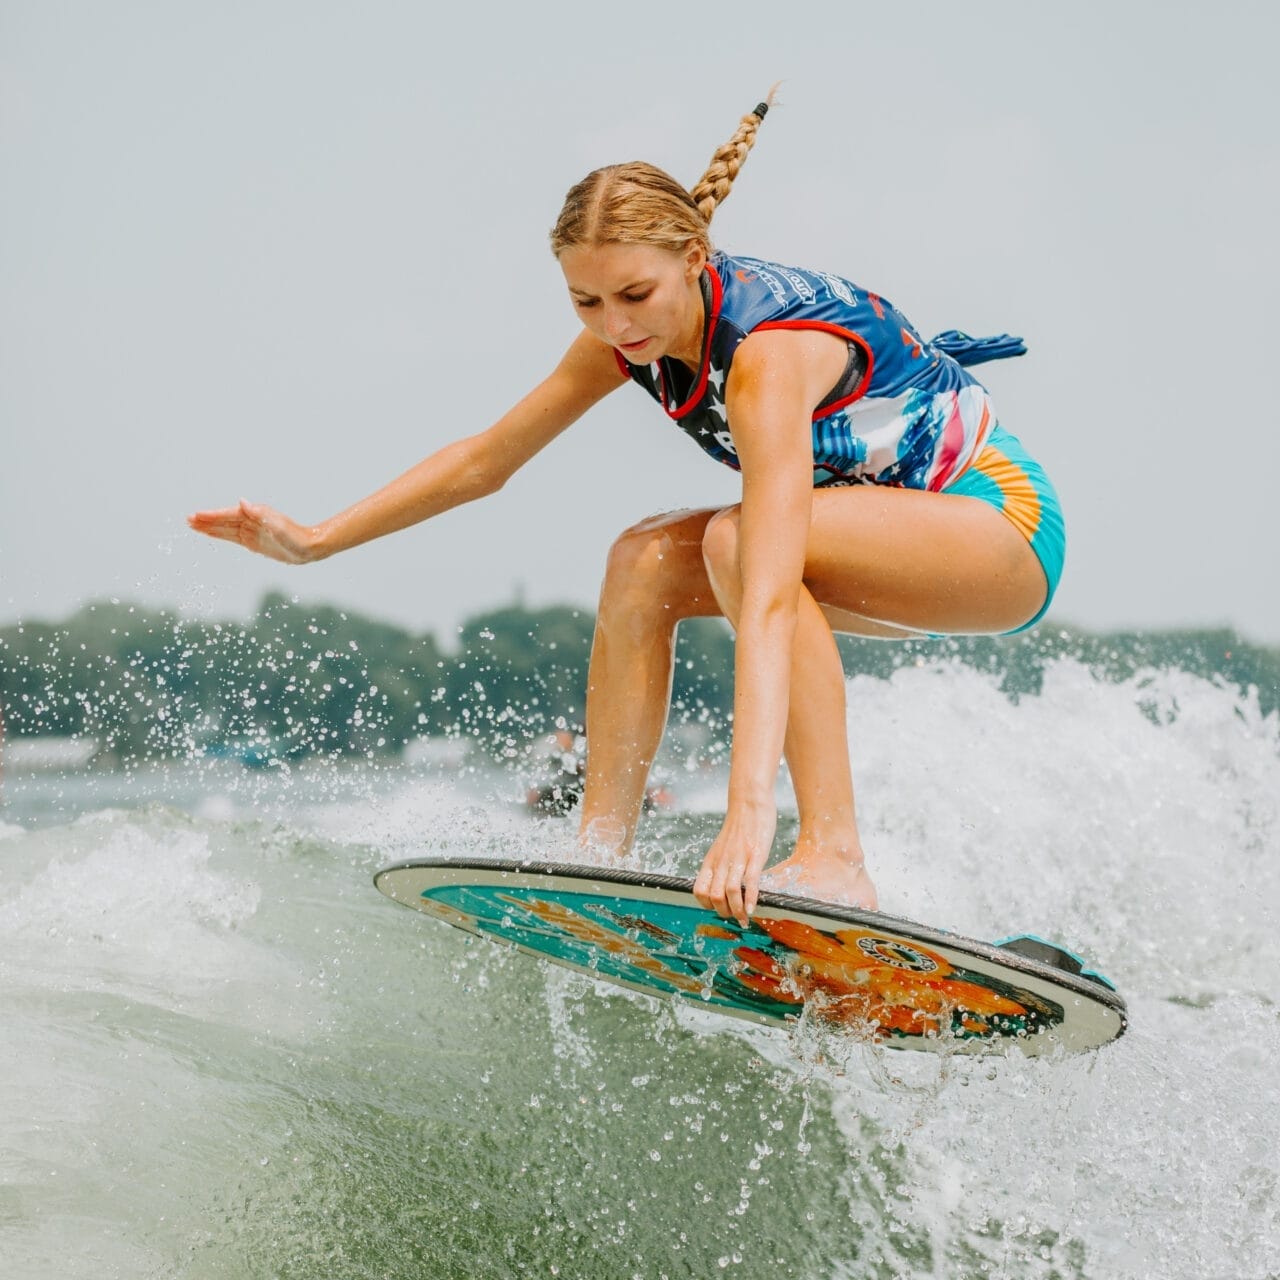 A woman riding a wave on a surfboard.